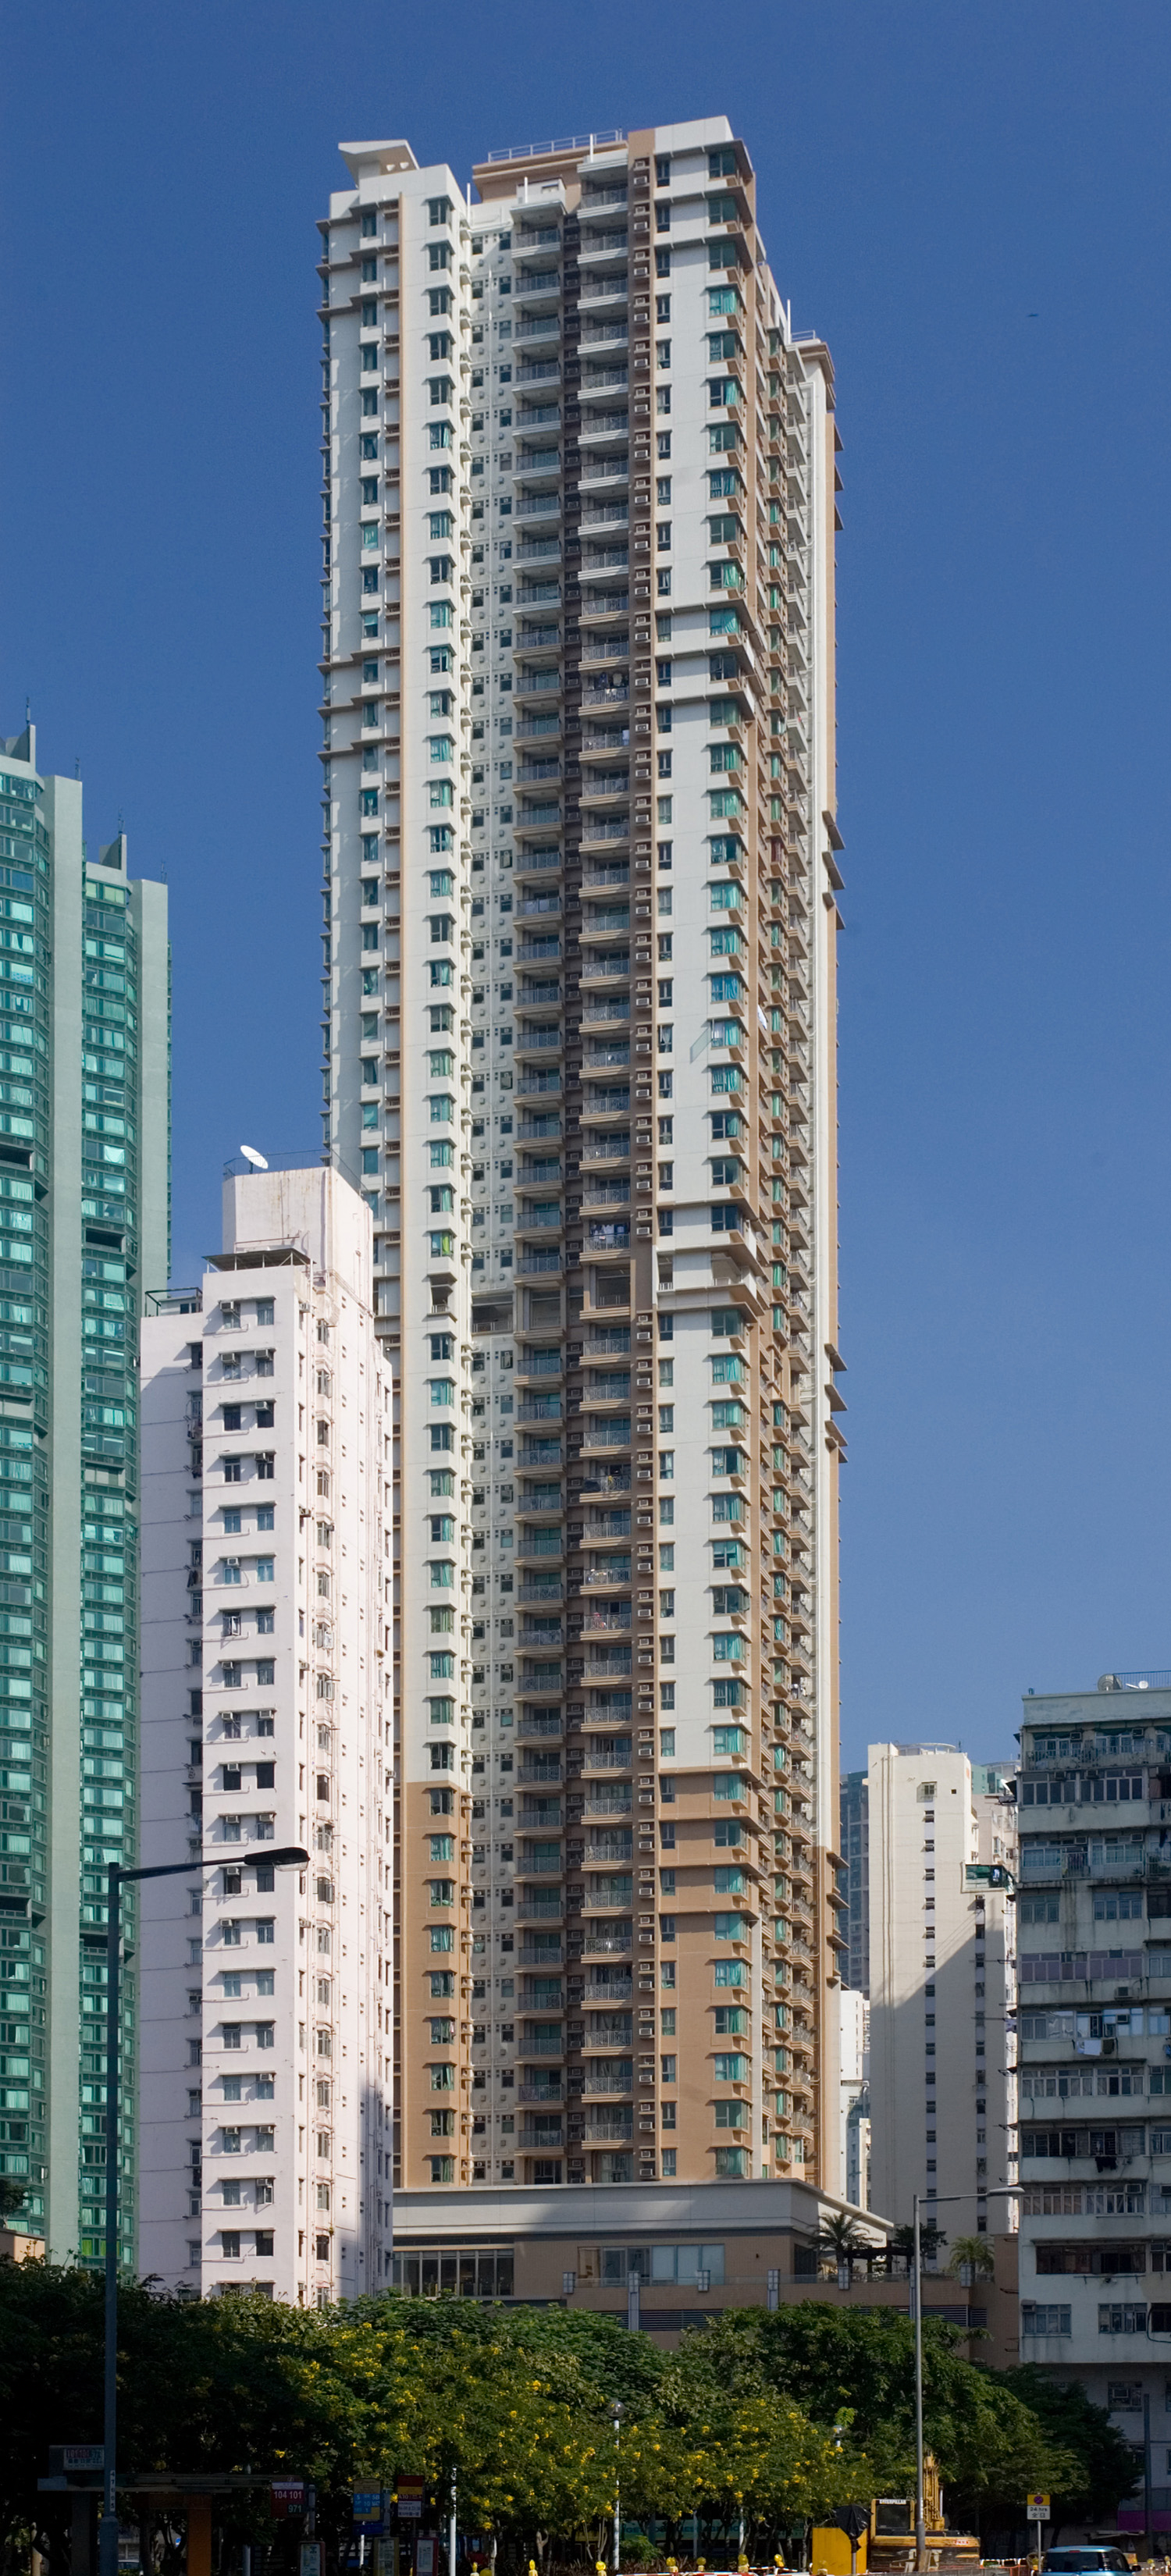 The Merton 3, Hong Kong - View from th west. © Mathias Beinling